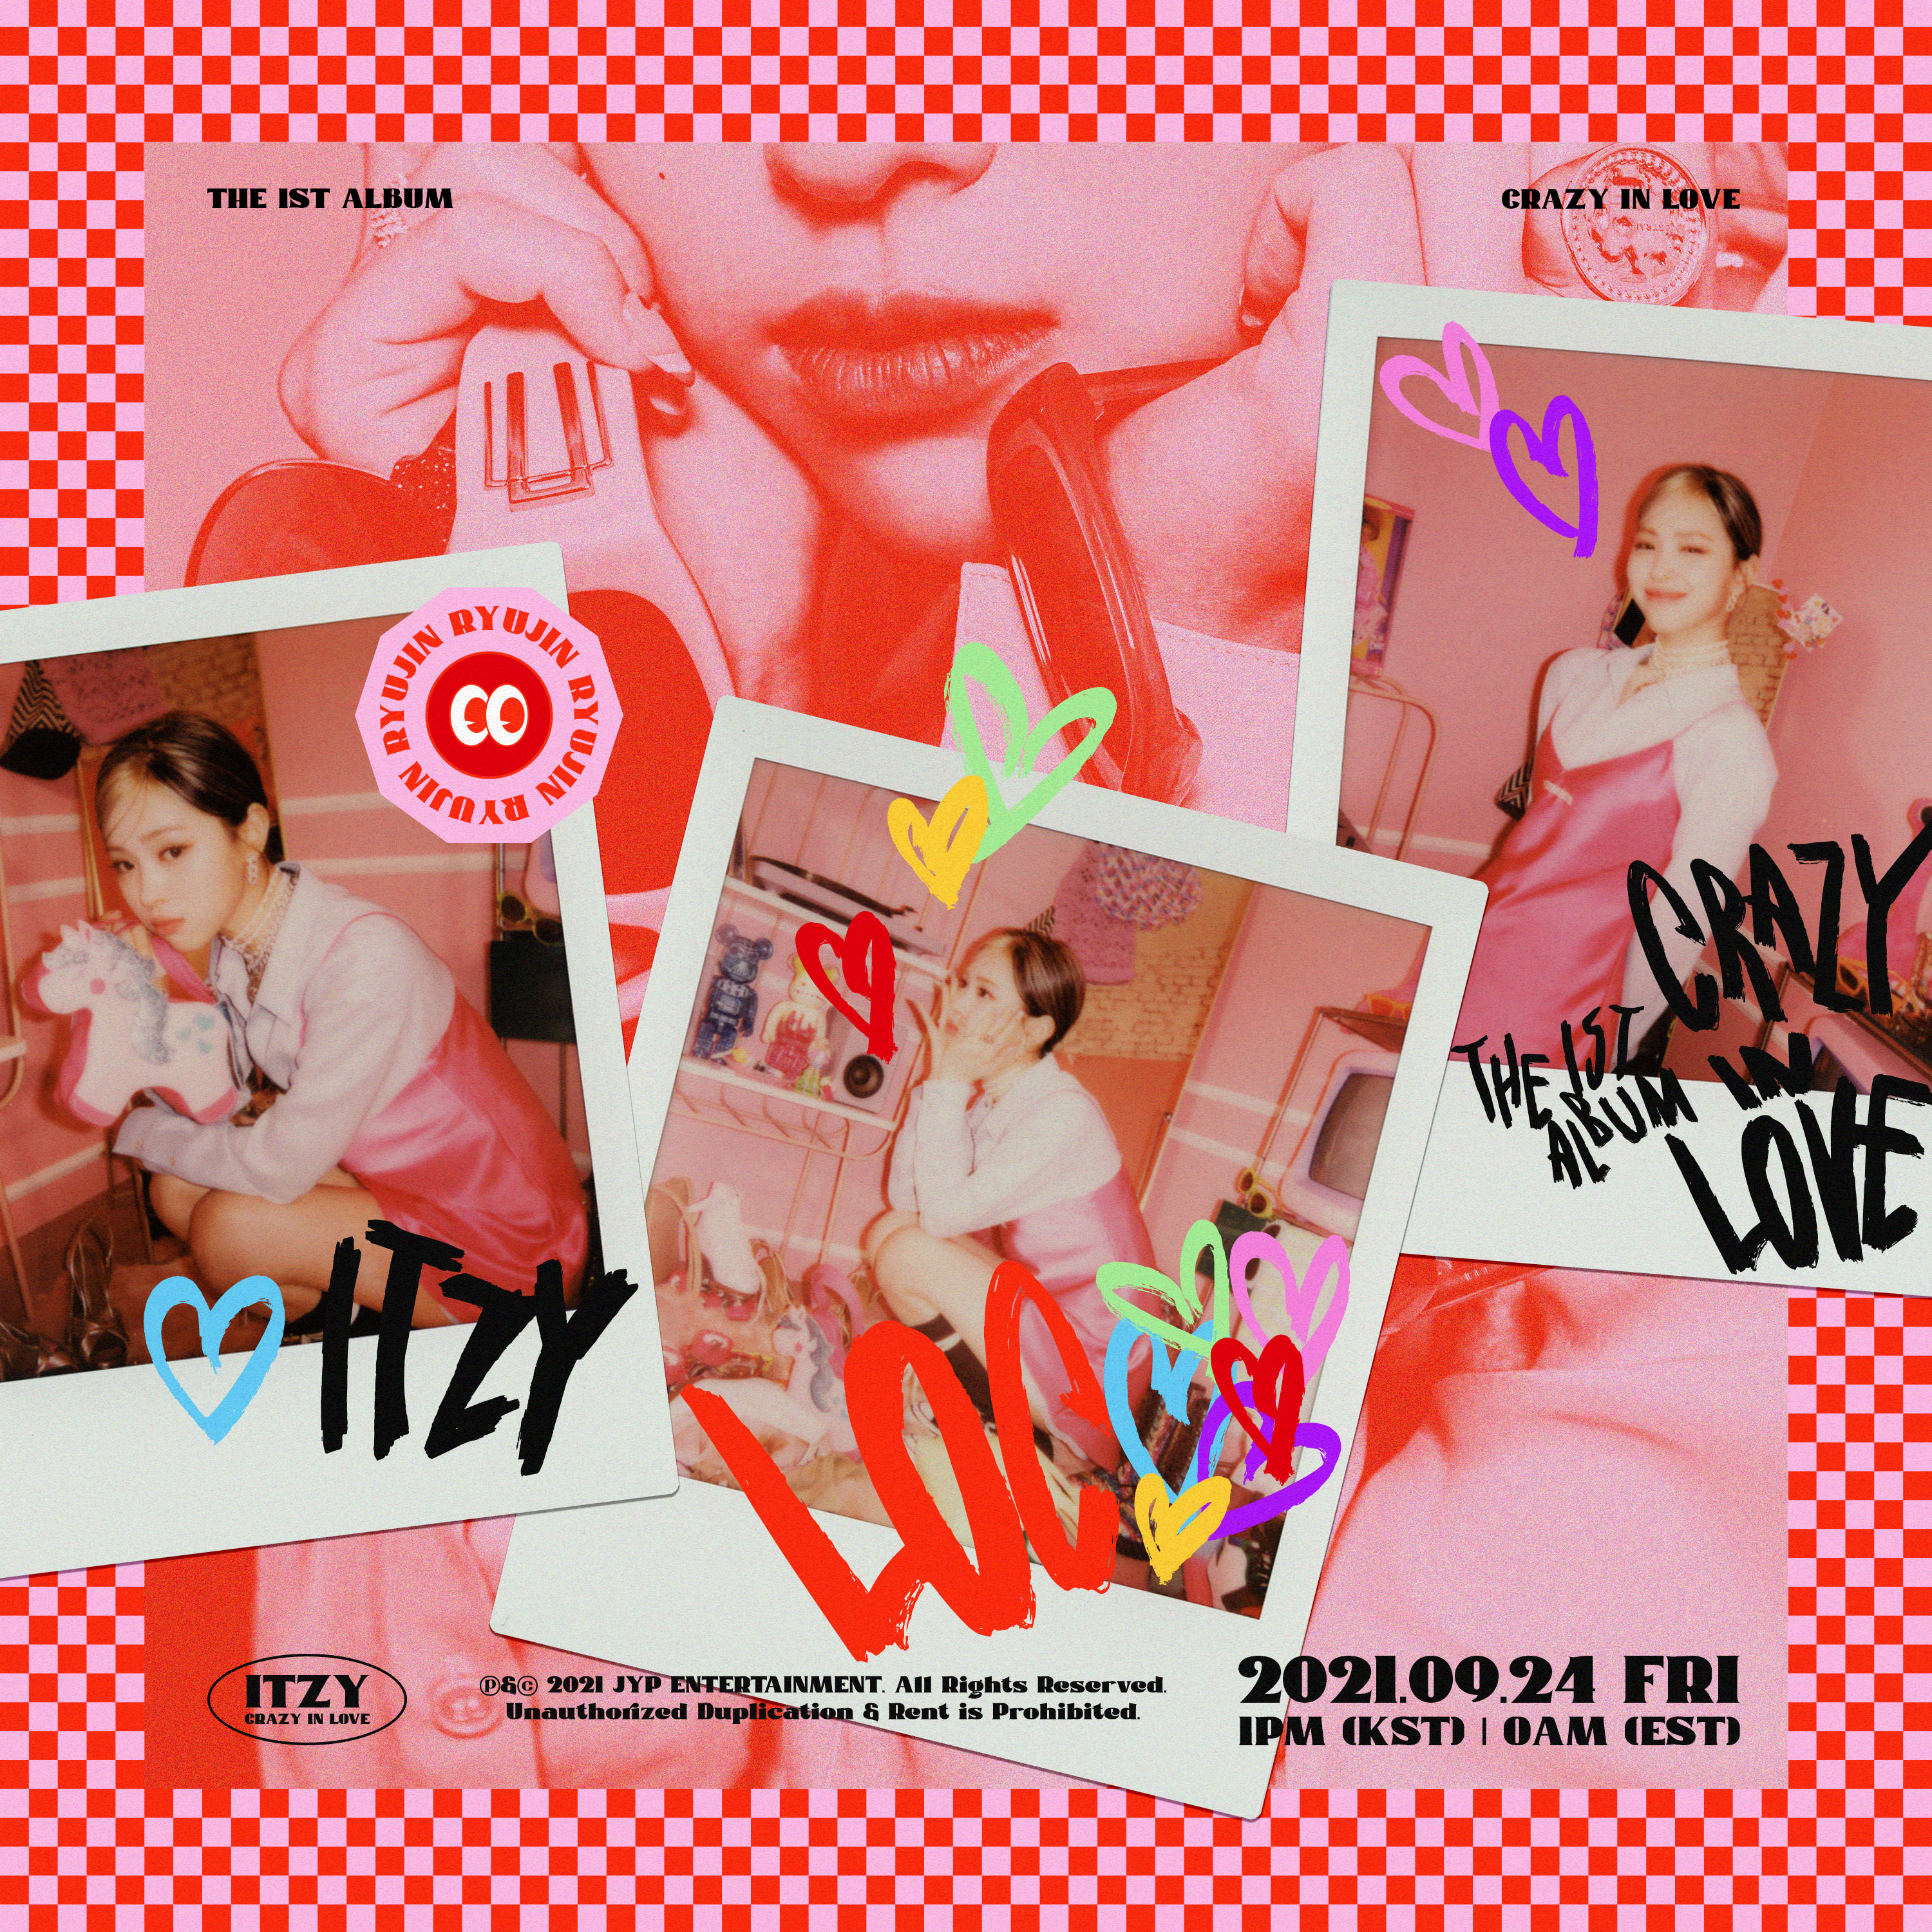 ITZY Crazy In Love Teaser (Photobook Preview ver.) (HD/HQ) - K-Pop Database  /